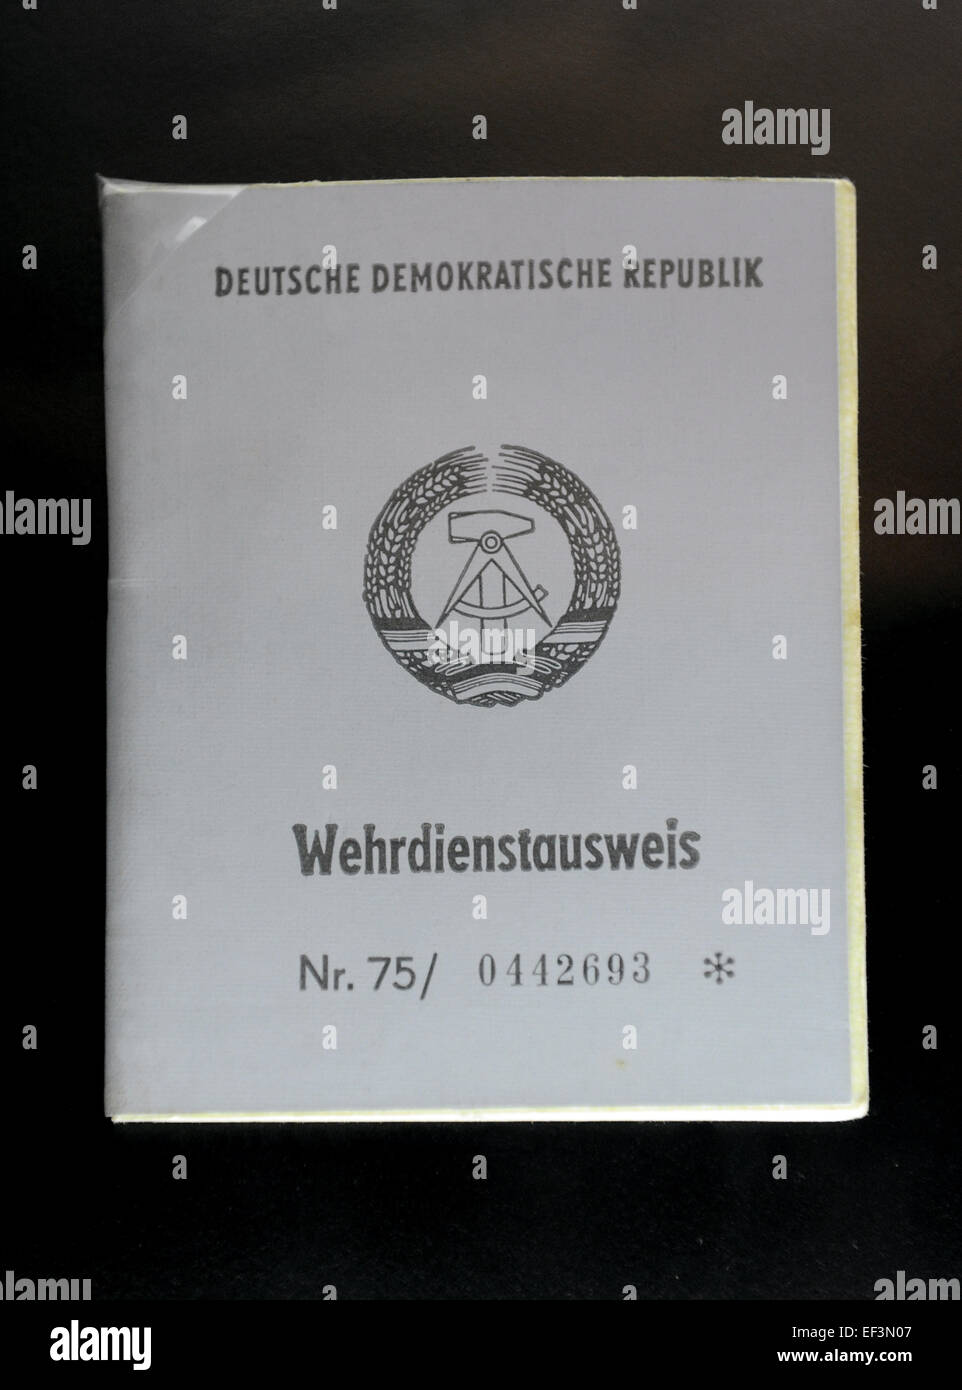 East Germany (GDR). Certificate of military service. 60's. 20th century. DDR Museum. Berlin. Germany. Stock Photo